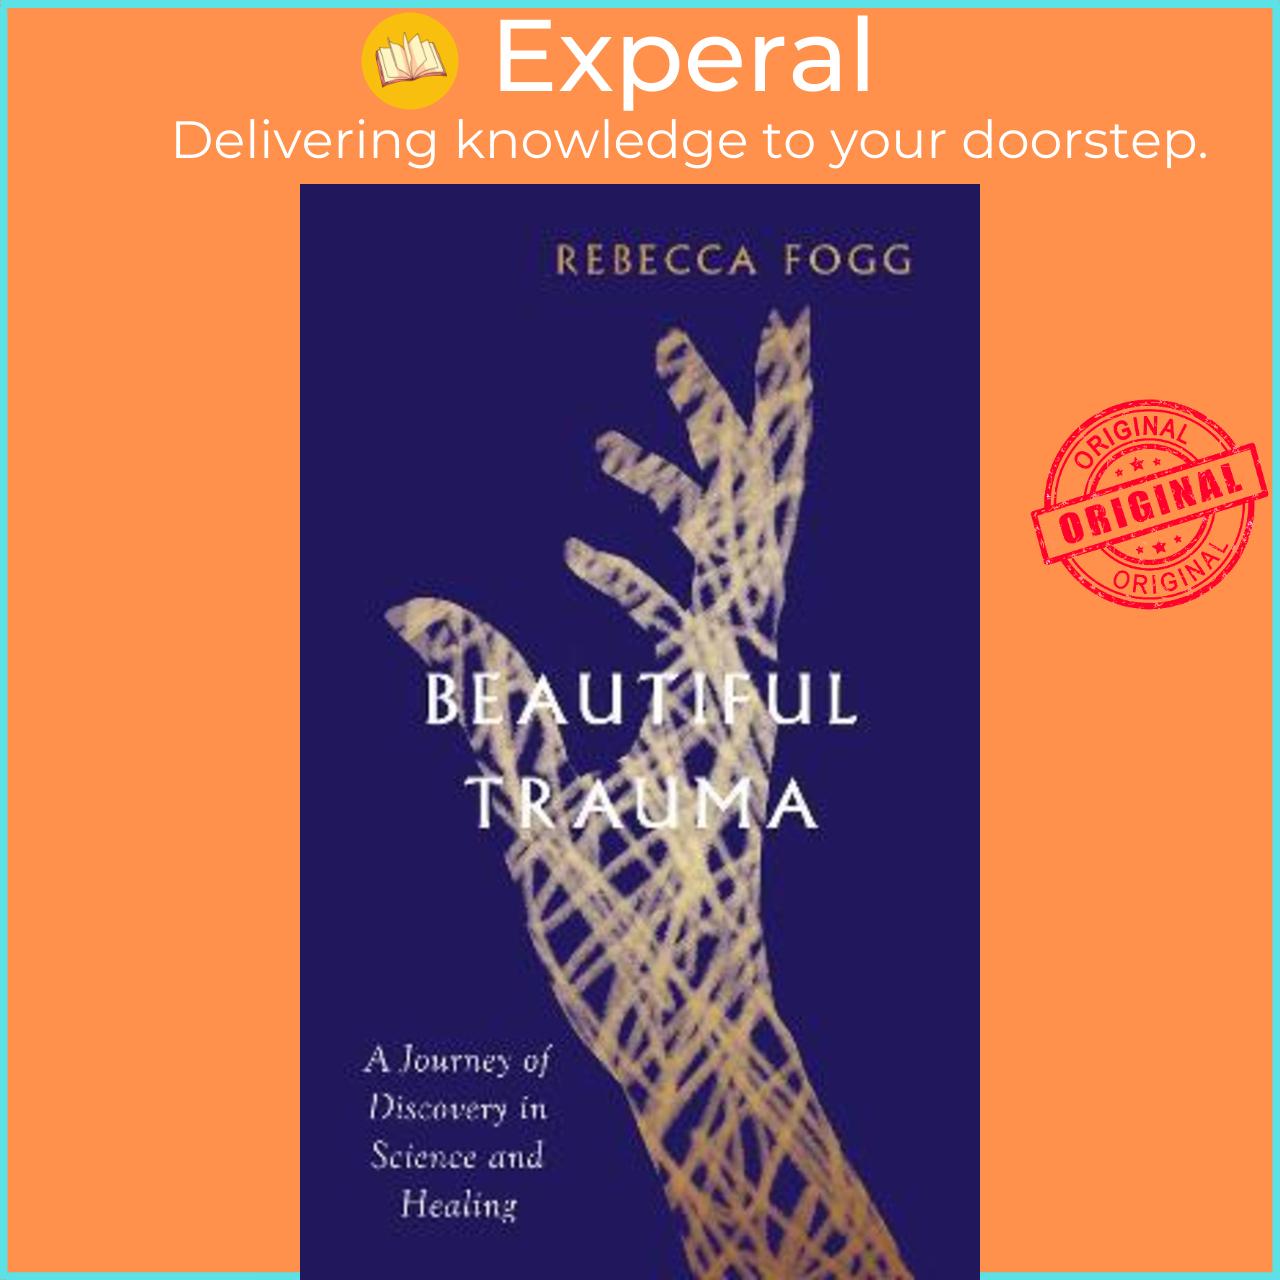 Sách - Beautiful Trauma : A Journey of Discovery in Science and Healing by Rebecca Fogg (UK edition, hardcover)